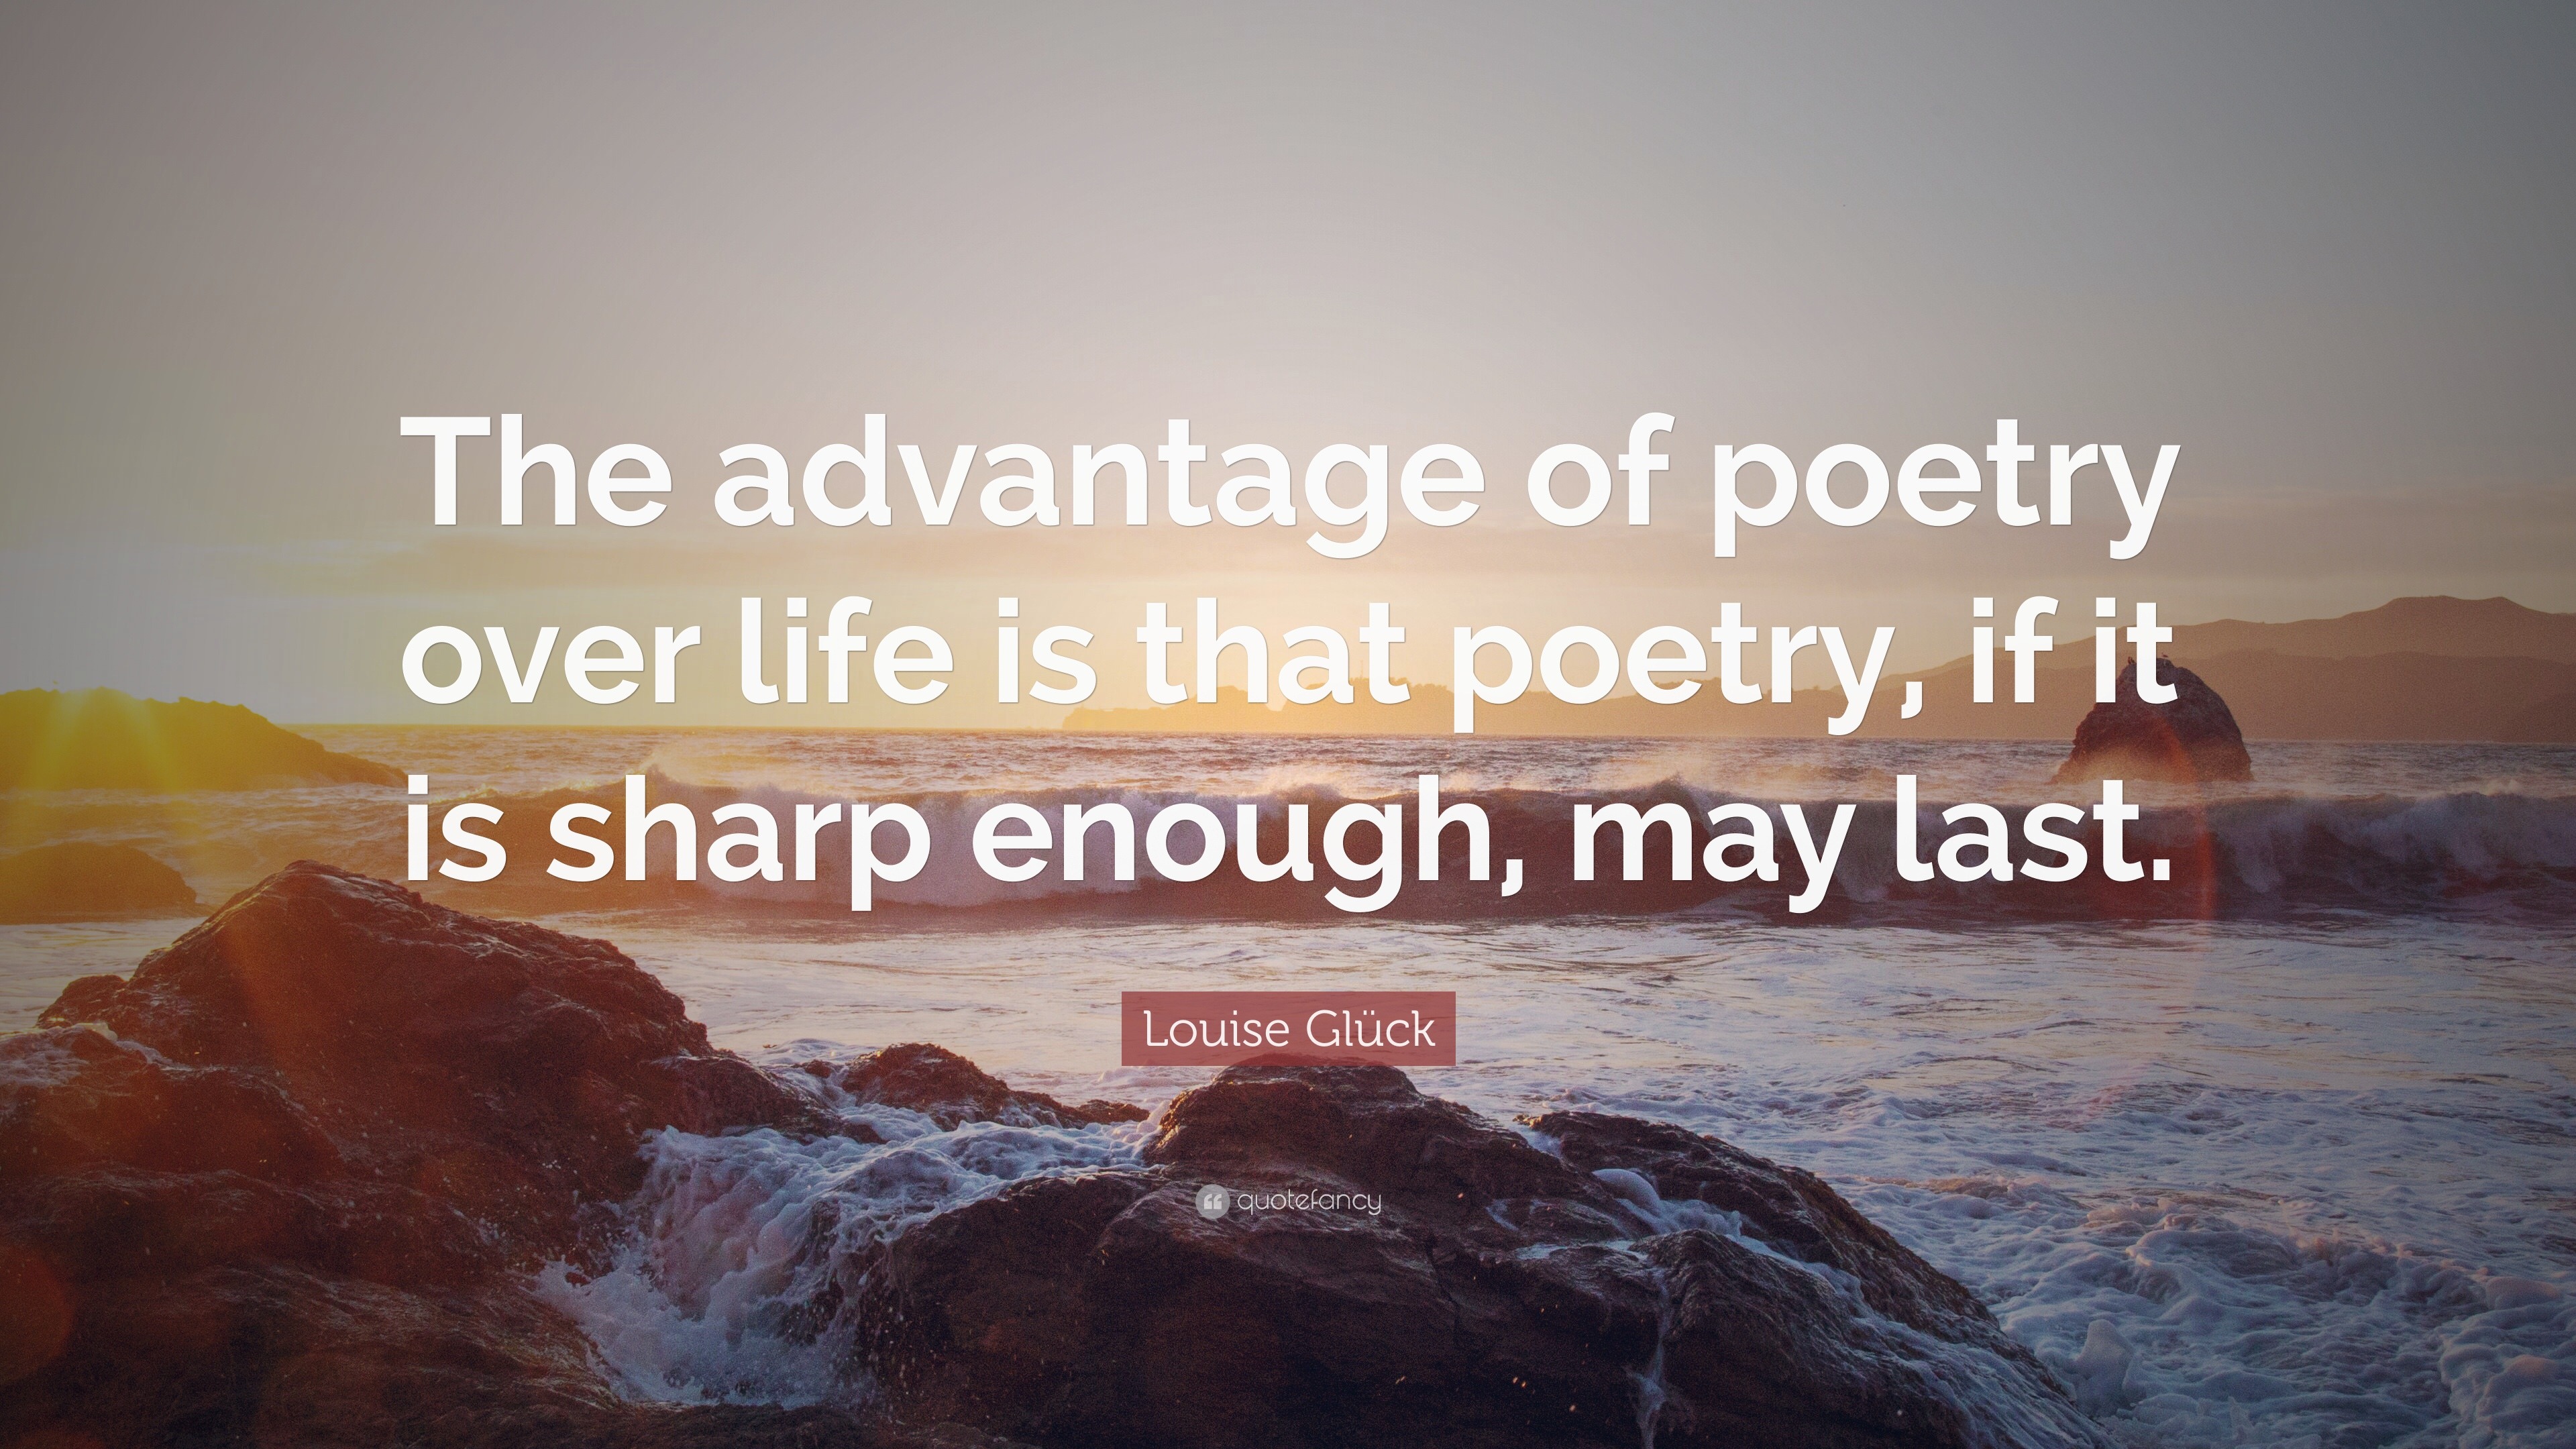 Louise Glück Quote: “The advantage of poetry over life is that poetry ...